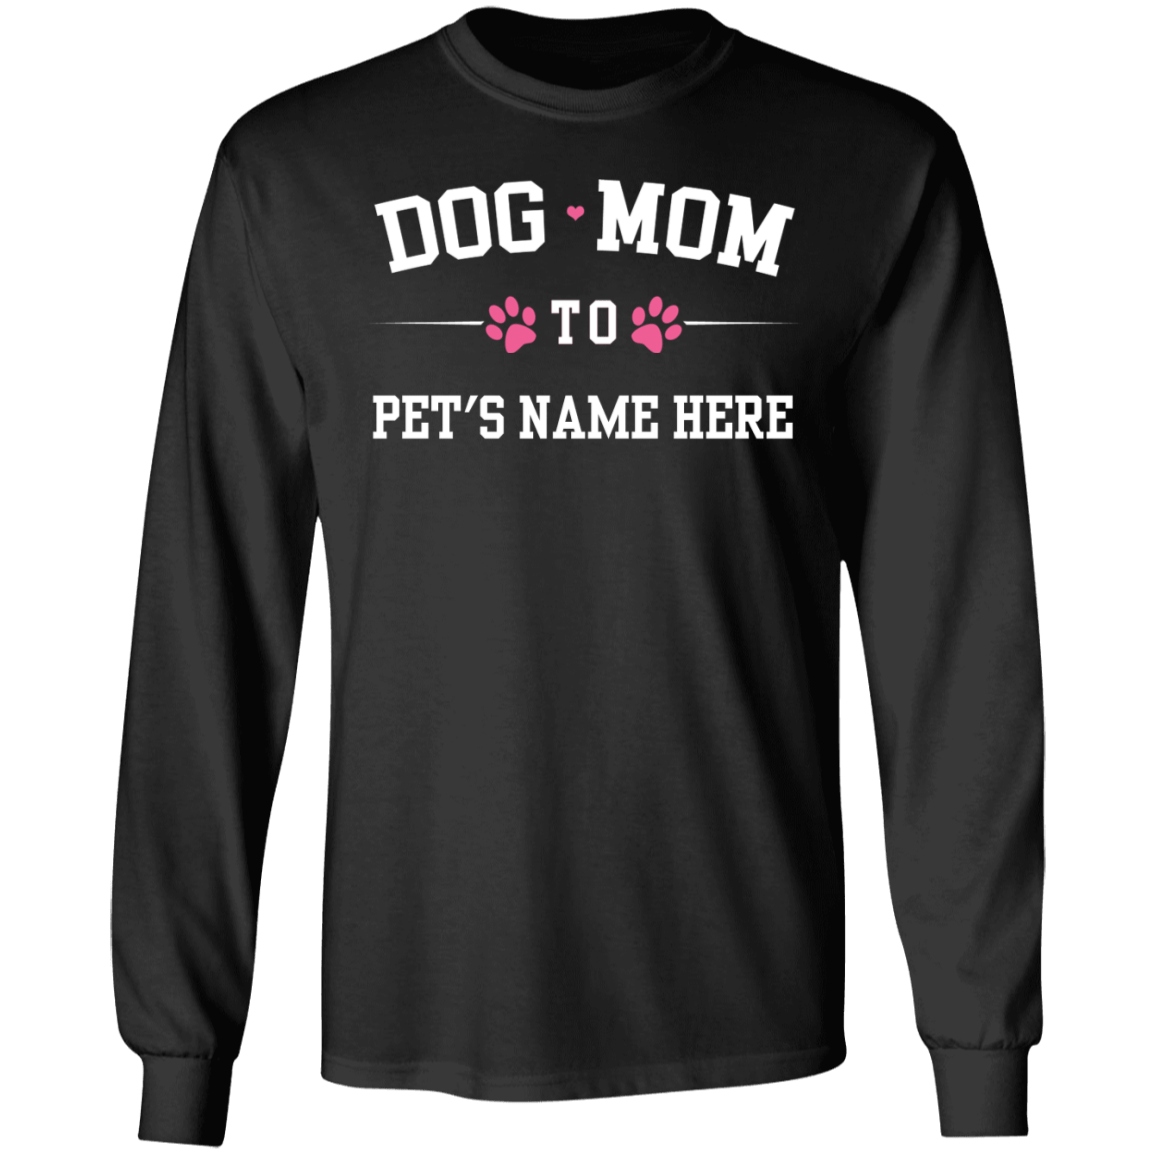 Personalized Dog Mom To - Long Sleeve T Shirt.